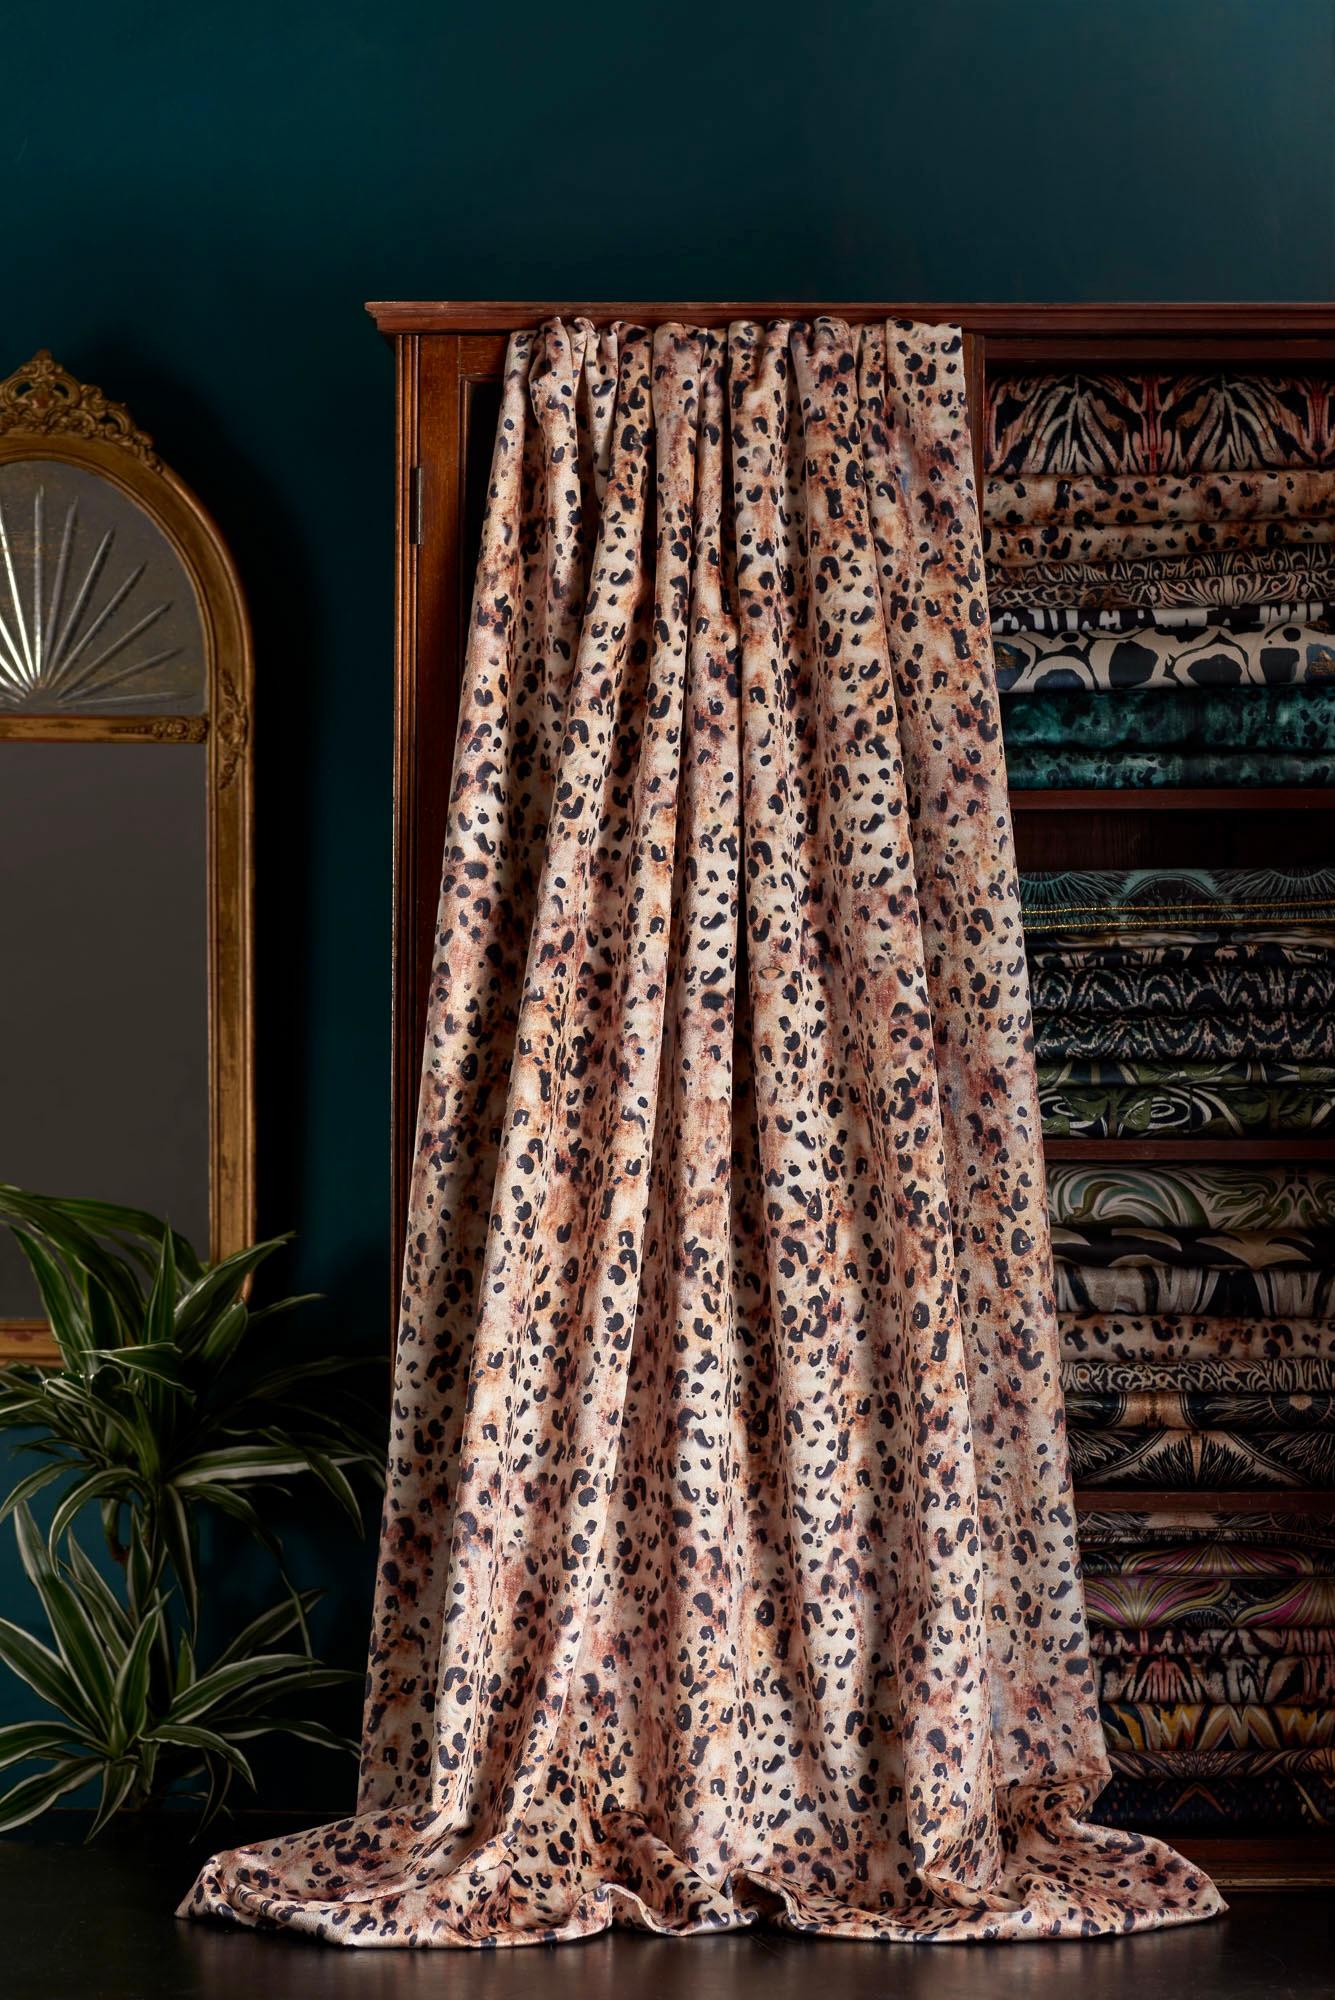 Sienna – a new more random version of her sister print – Savannah. A painterly leopard style design in tones of beige, black, and cream with touches of blue.

This velvet is midweight, with a strong straight woven backing, so is suitable for